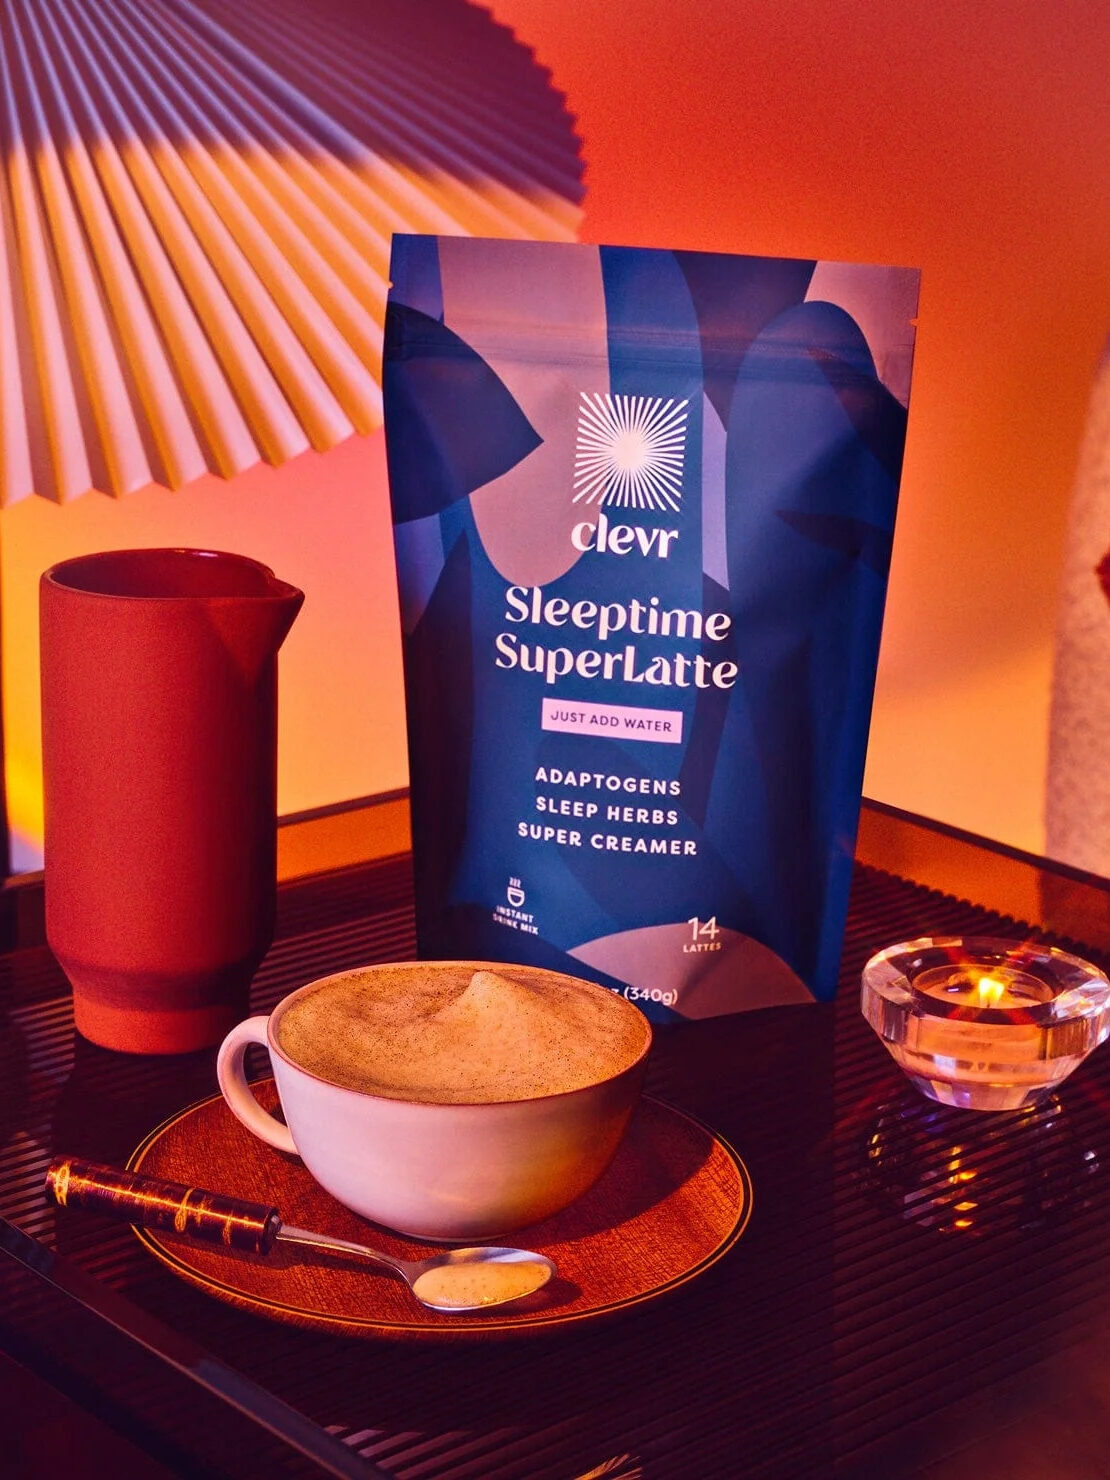 A pack of Clevr Sleeptime Coffee Alternative with a brewed cup of the same blend in front of it.